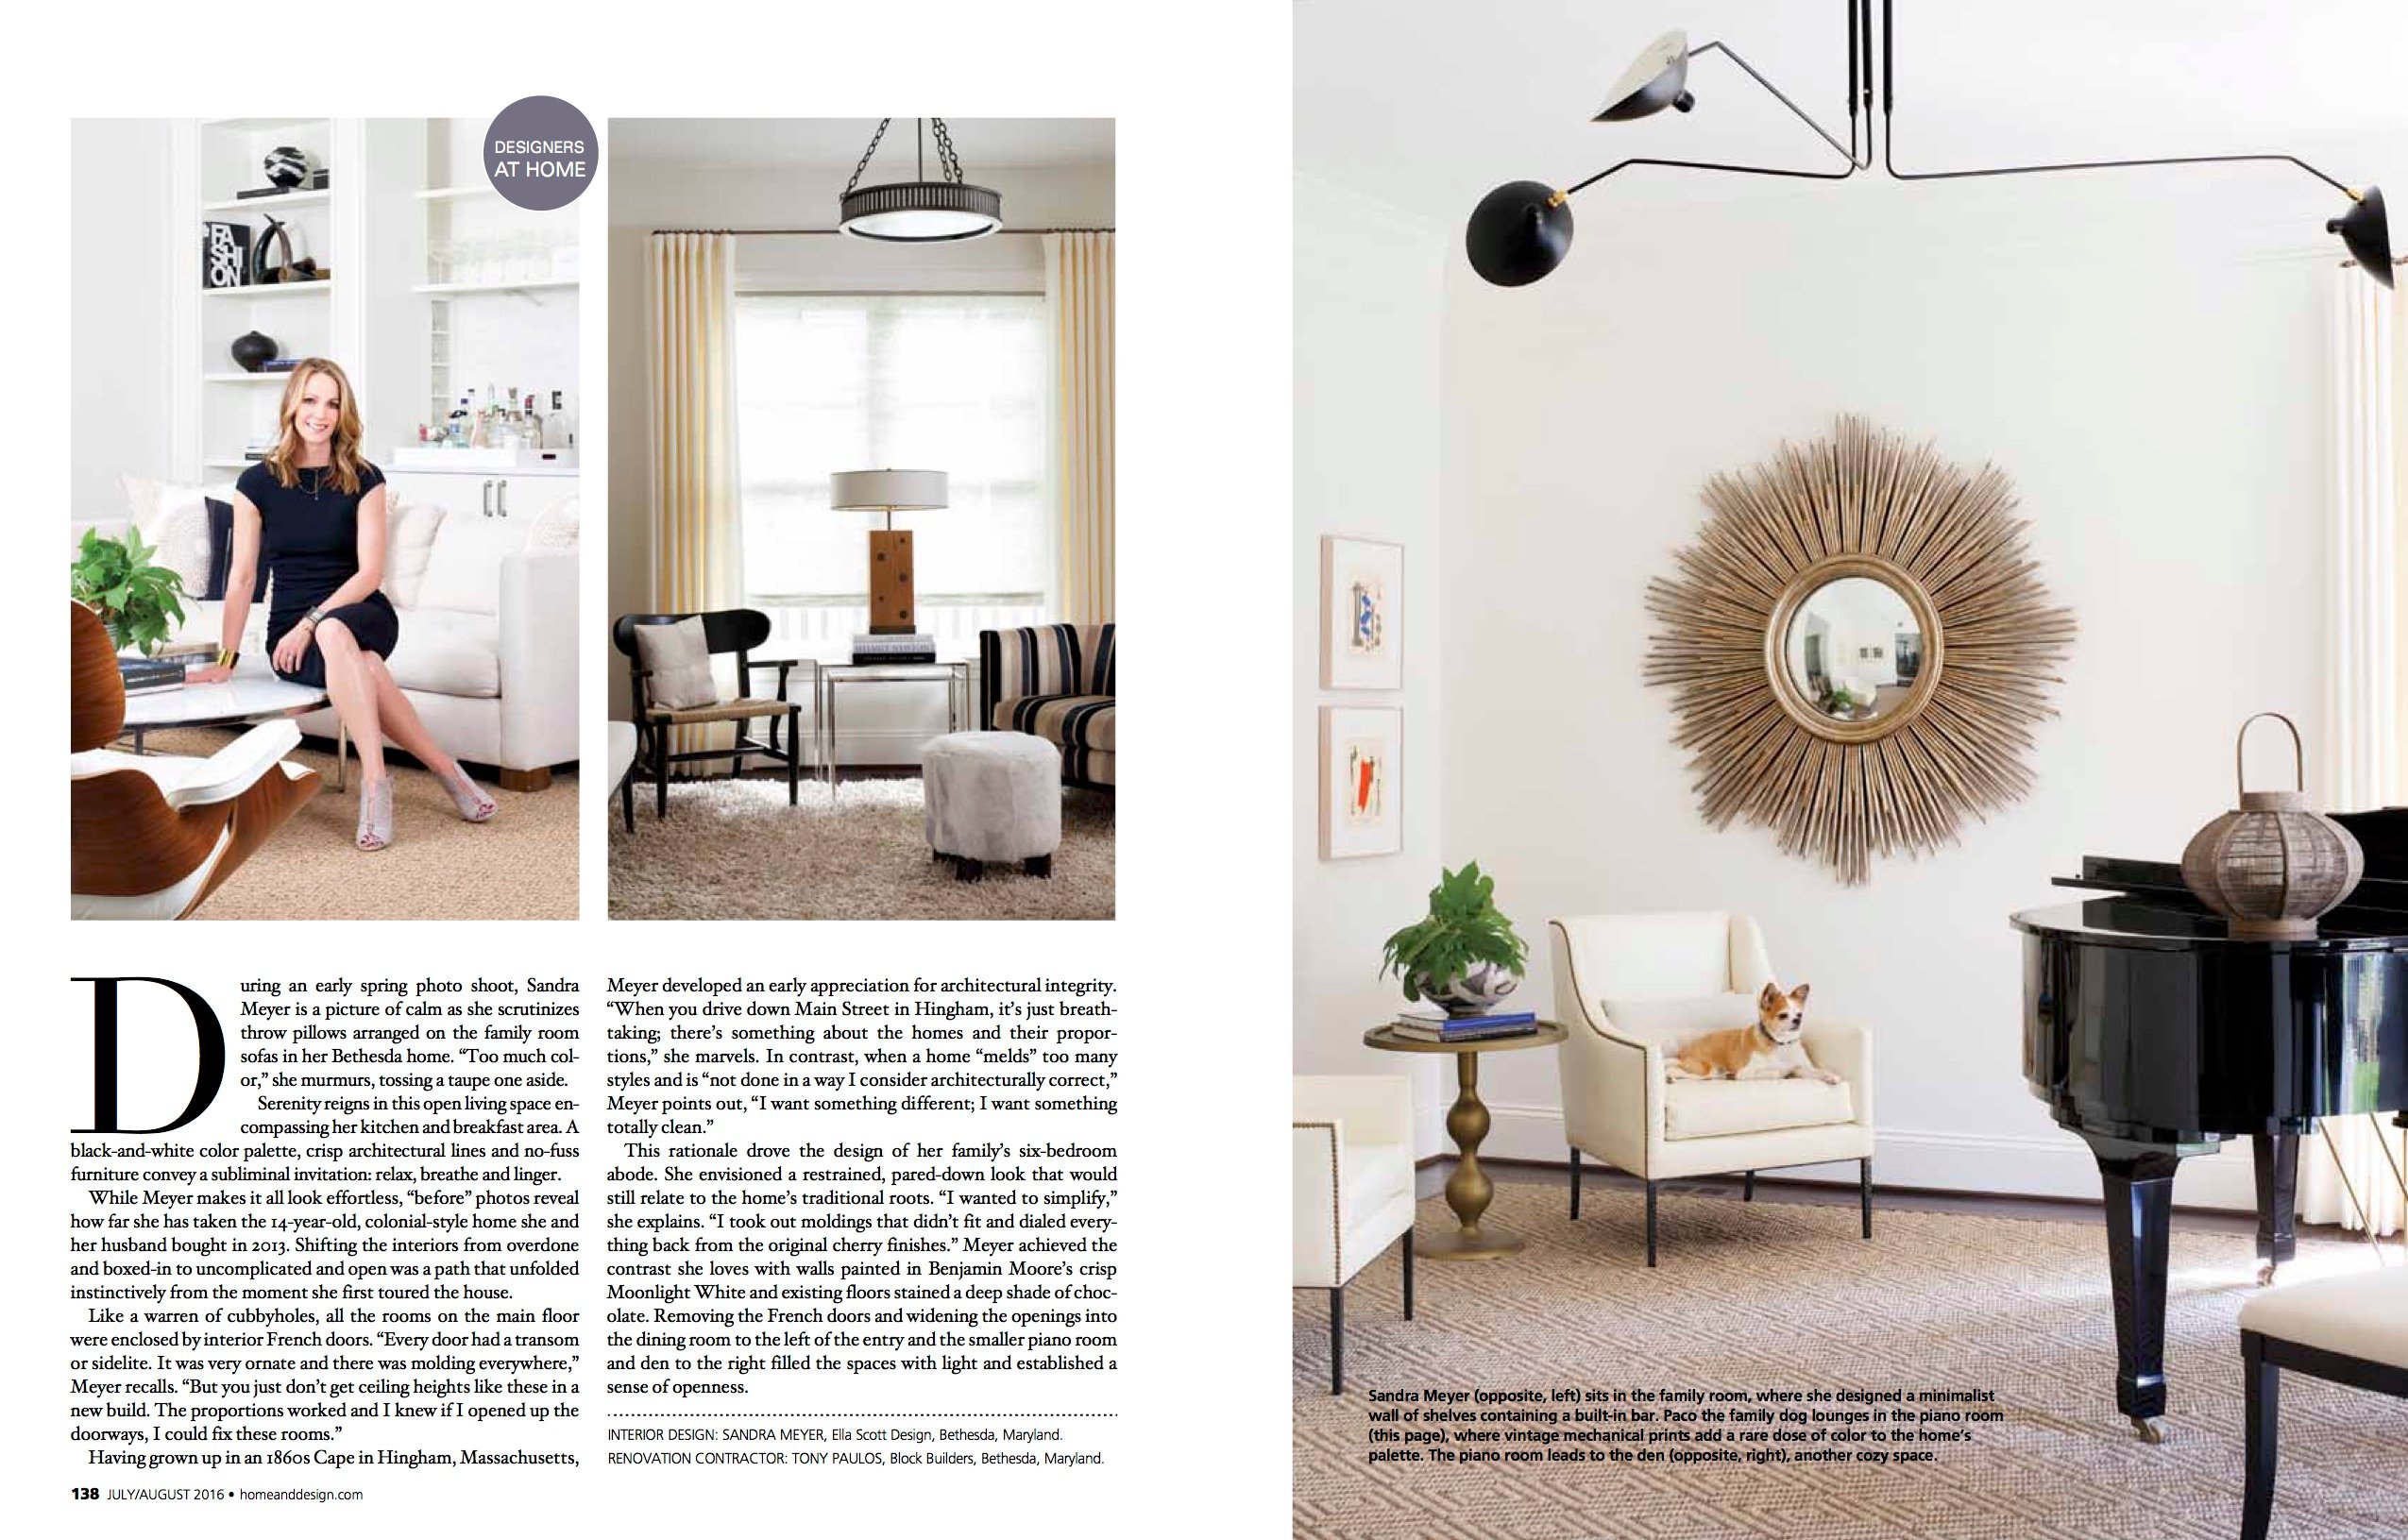 A tear sheet from Home & Design showcasing photos of livings rooms. Photos by Stacy Zarin Goldberg.